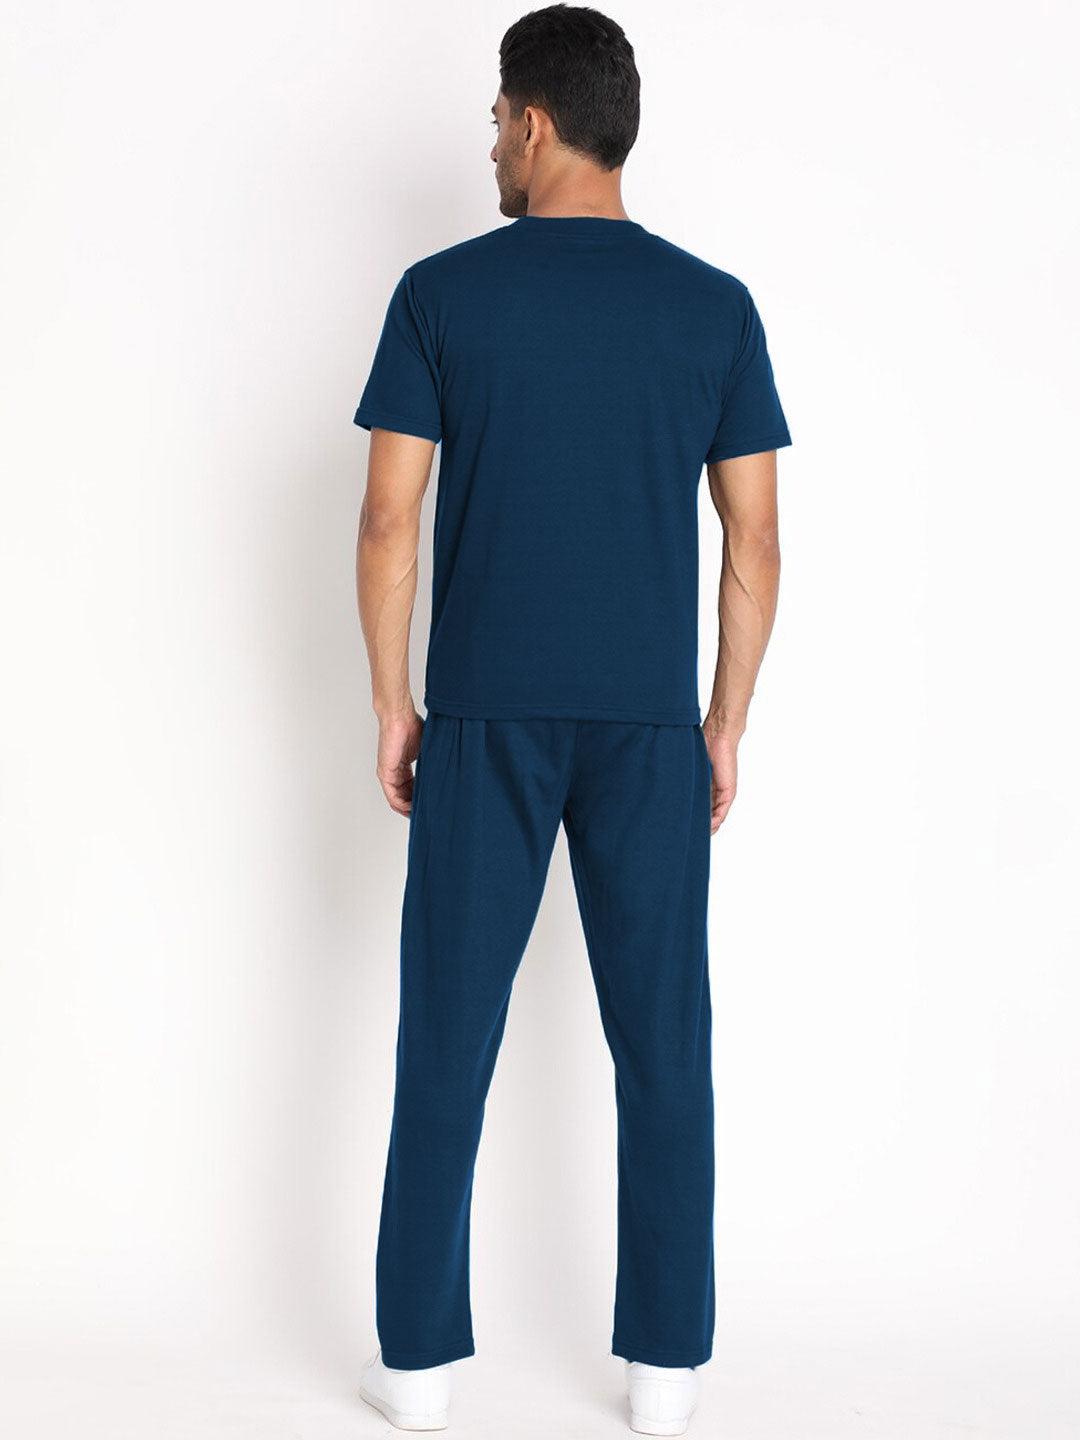 Mens Full Track Suits in Nevy Blue Colour - Aadhitri